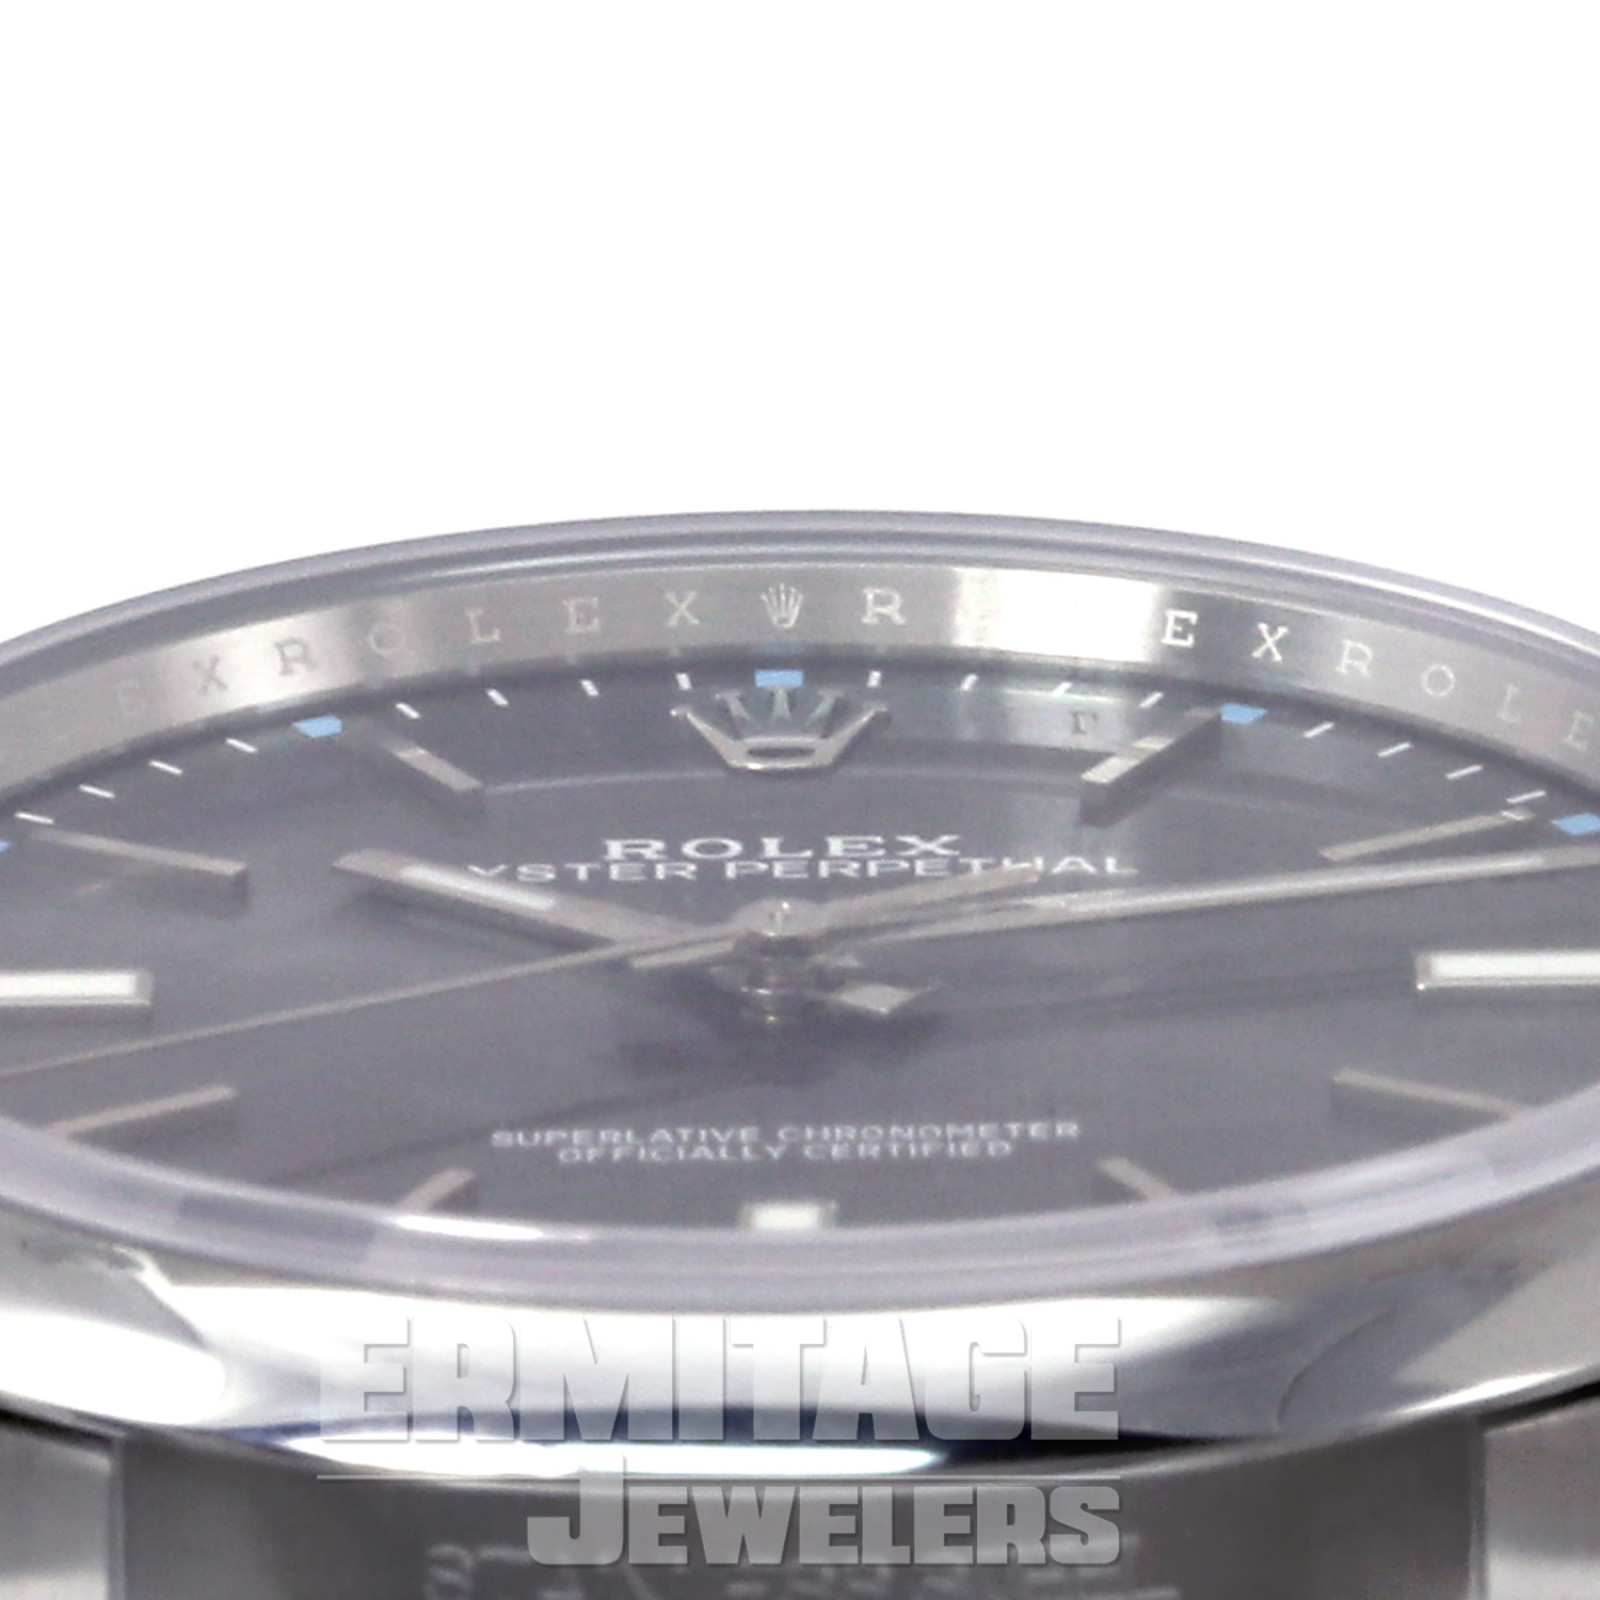 Steel on Oyster Rolex Oyster Perpetual 114300 39 mm